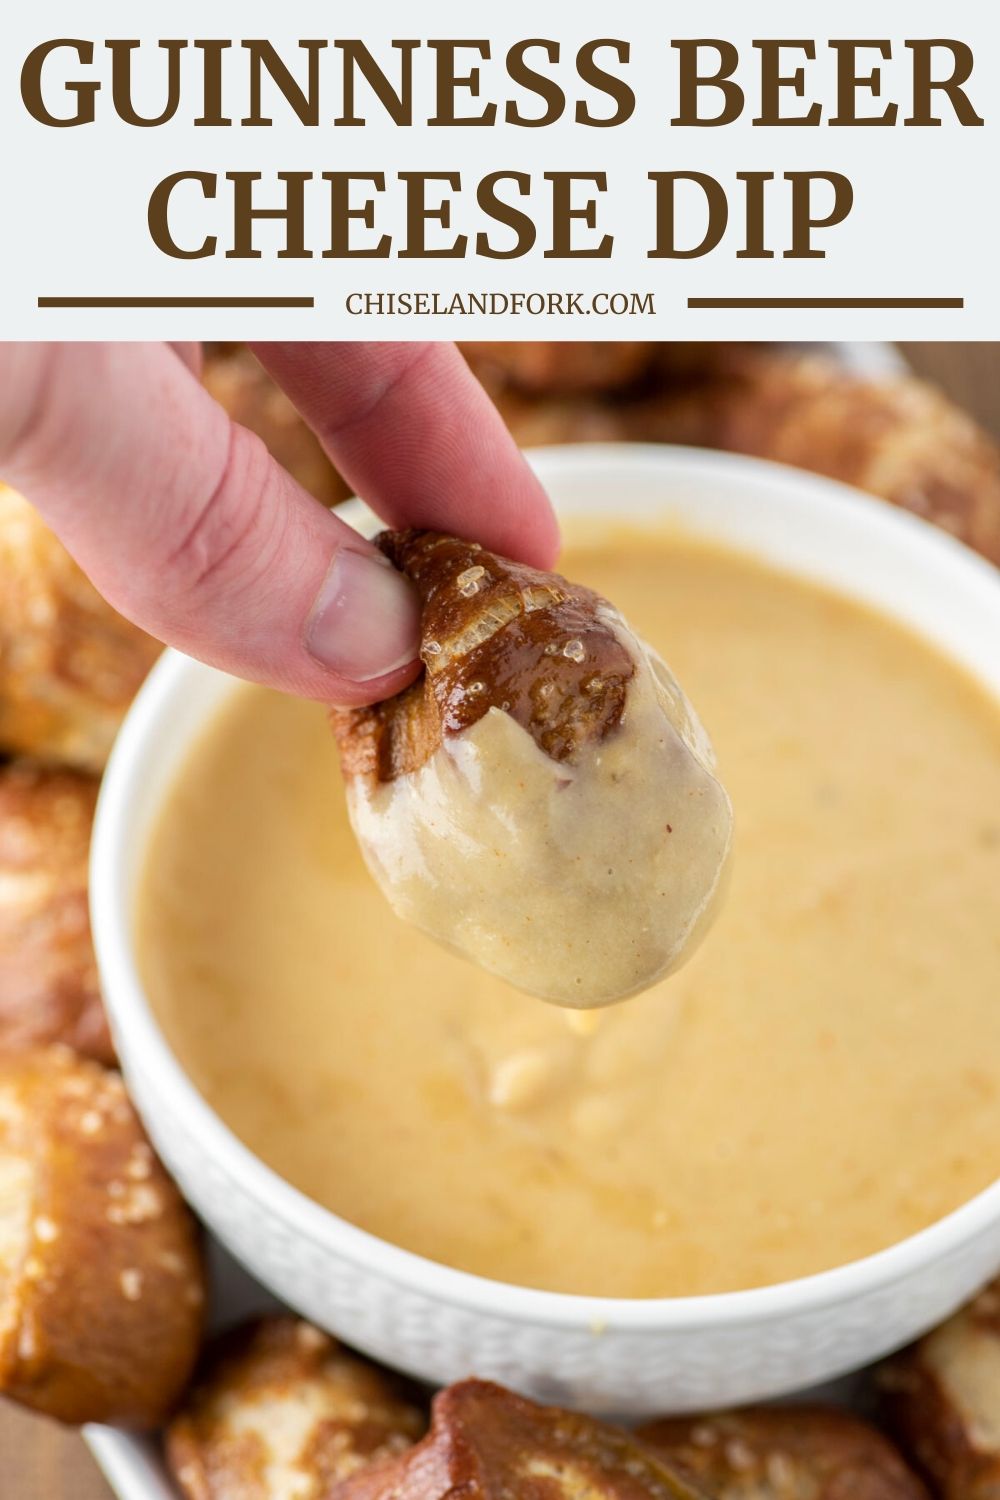 Guinness Beer Cheese Dip Recipe - Chisel & Fork